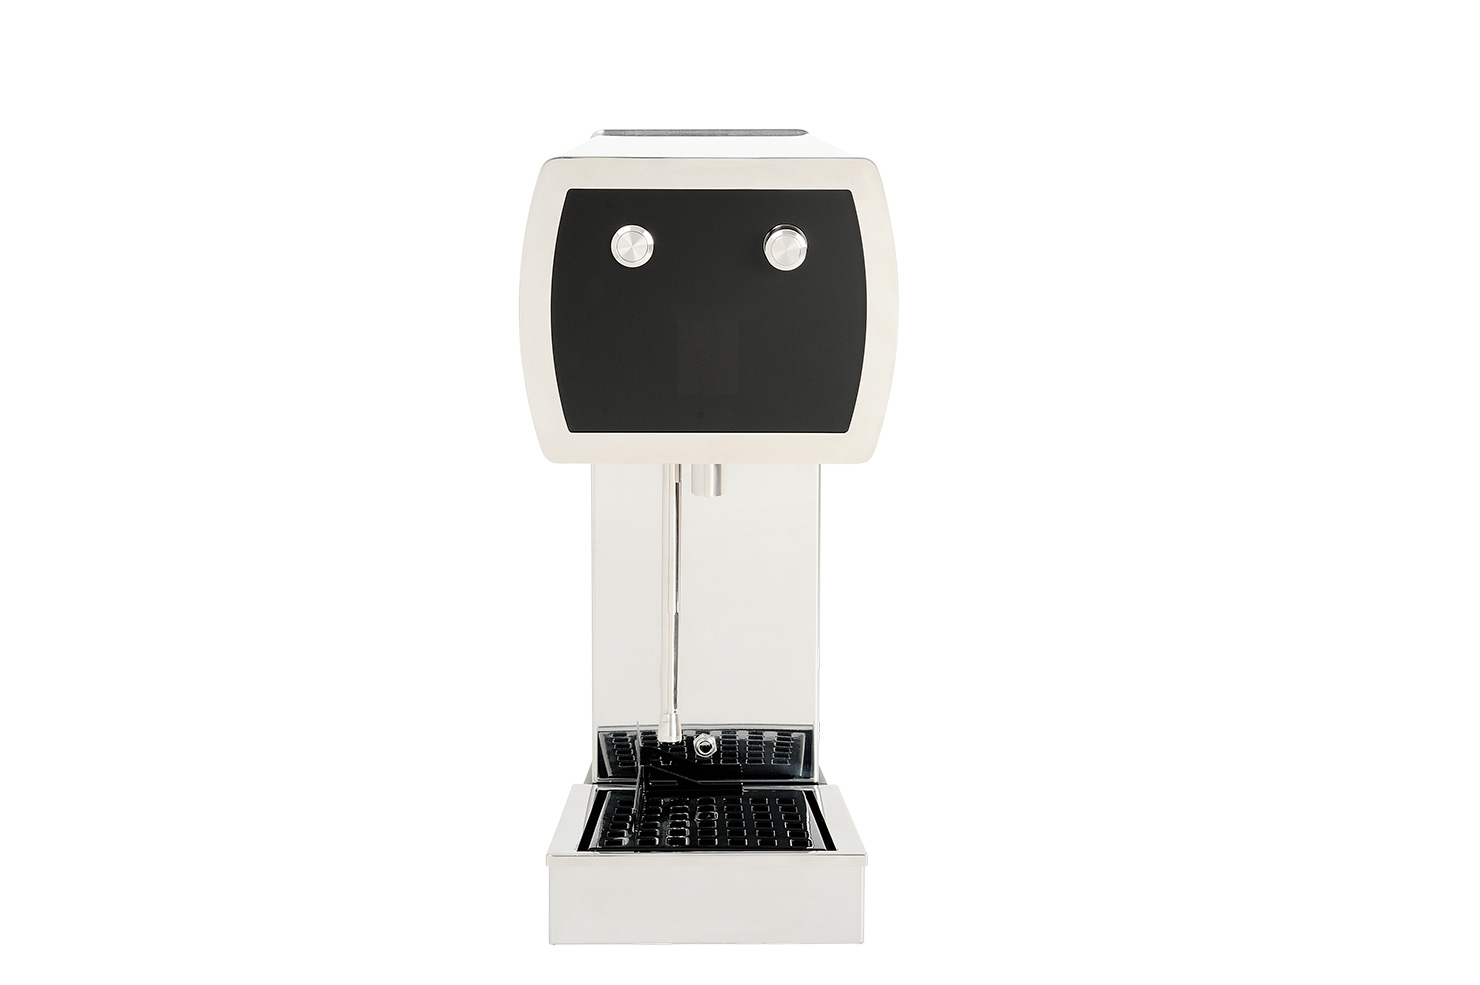 Meet Wally Milk, The New Automatic Milk Steamer From La Marzocco